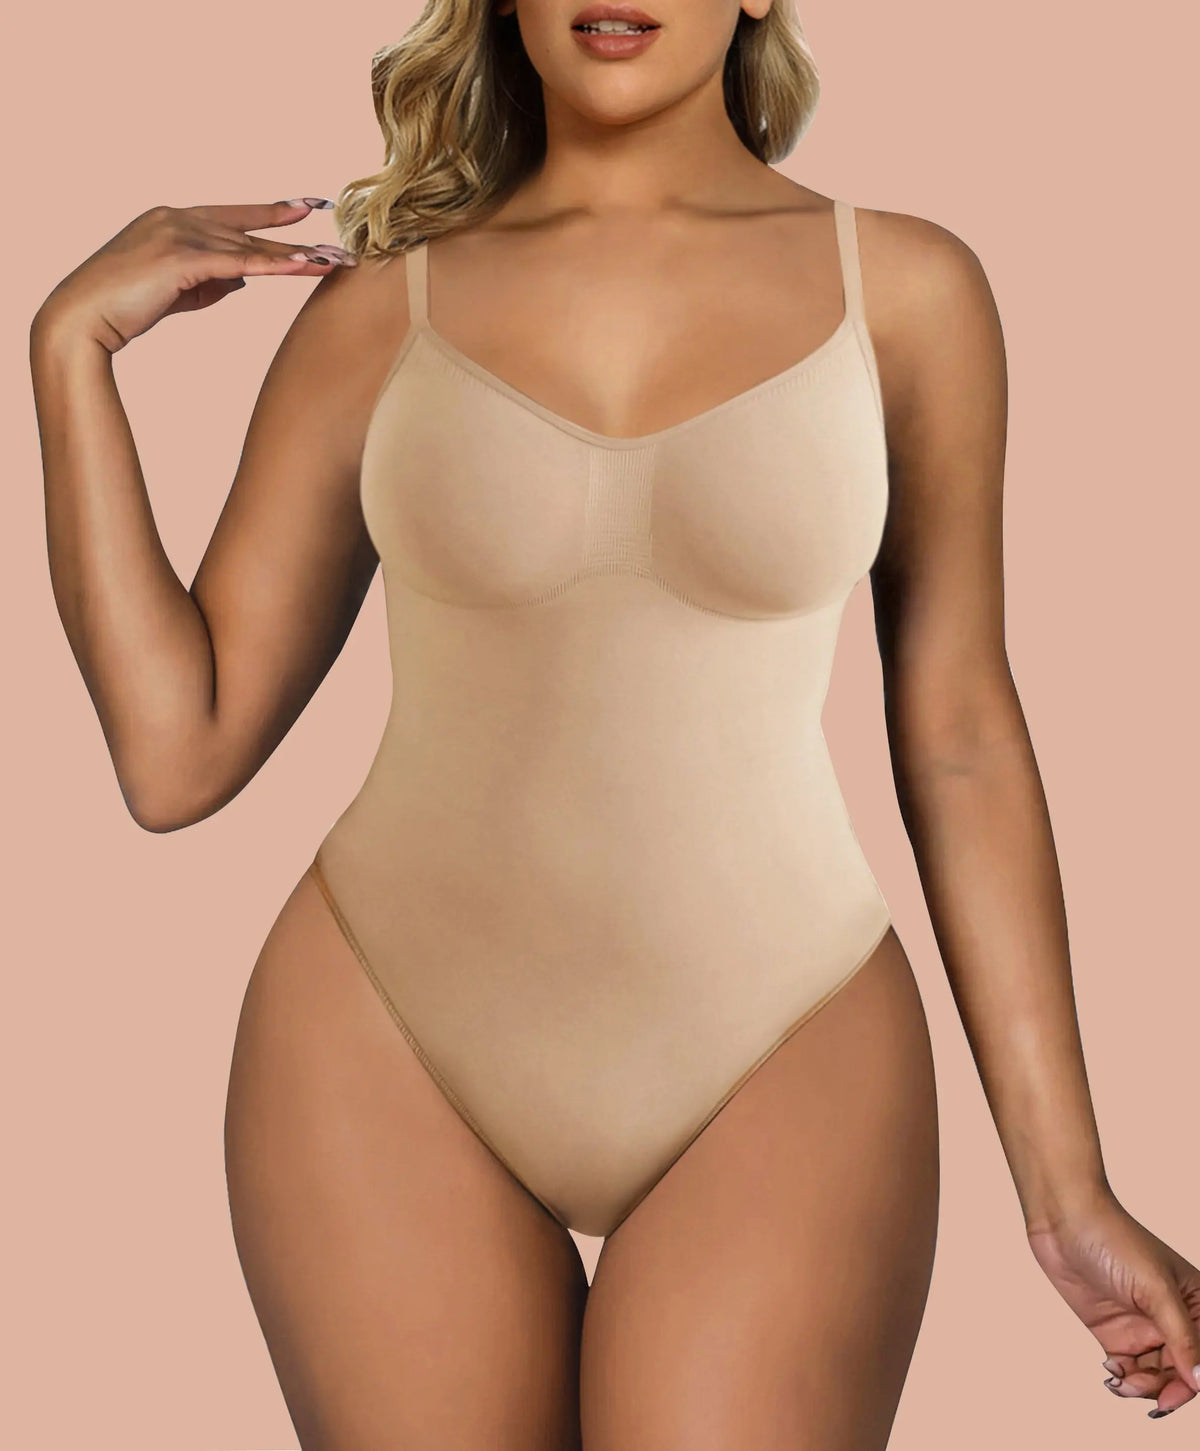 Women's Body Shapers and Bodysuits